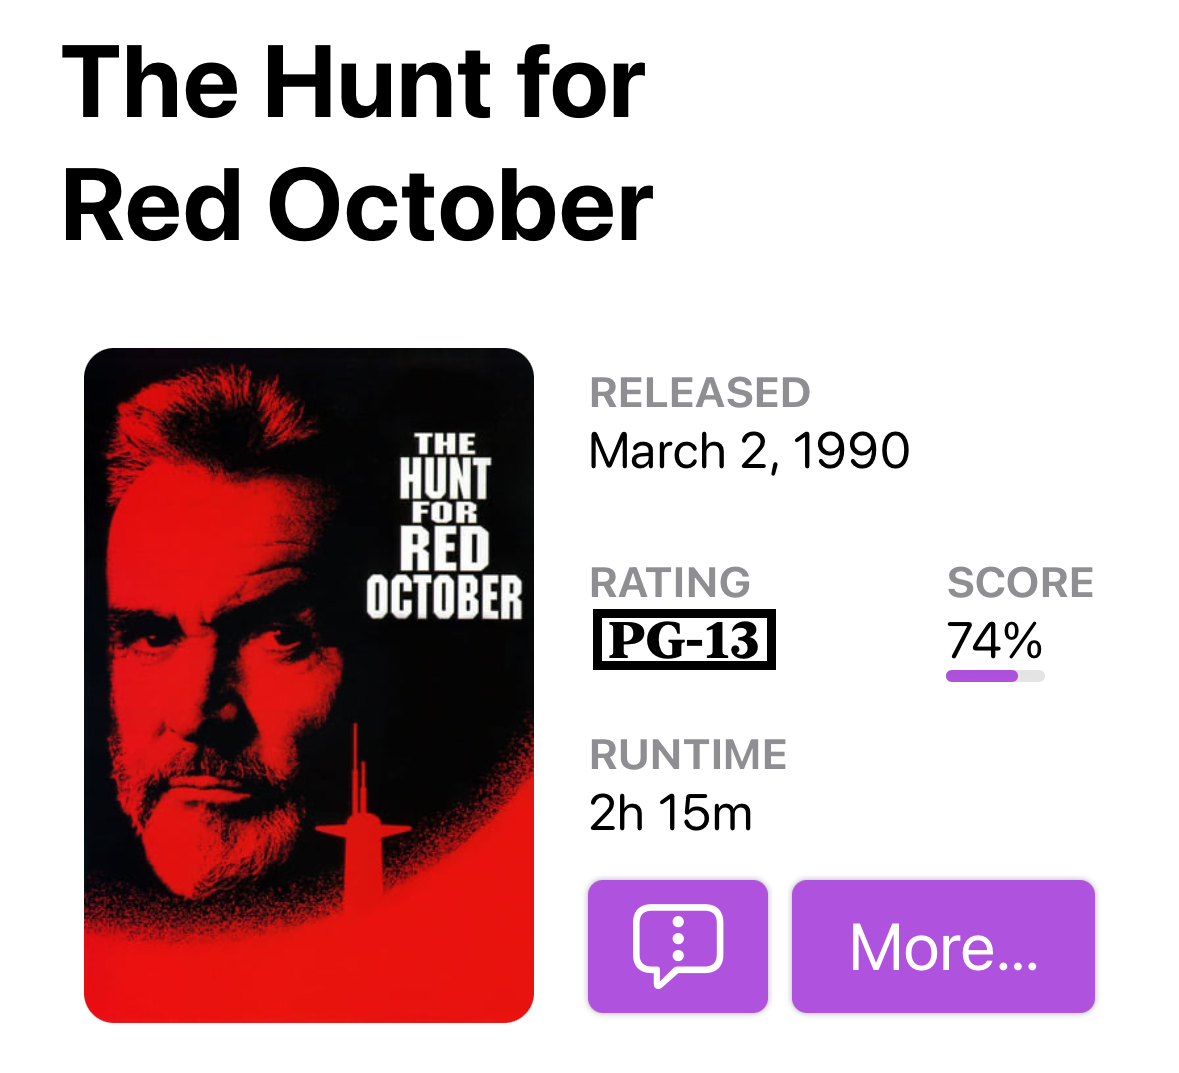 Screenshot of the "above the fold" section of "The Hunt for Red October"